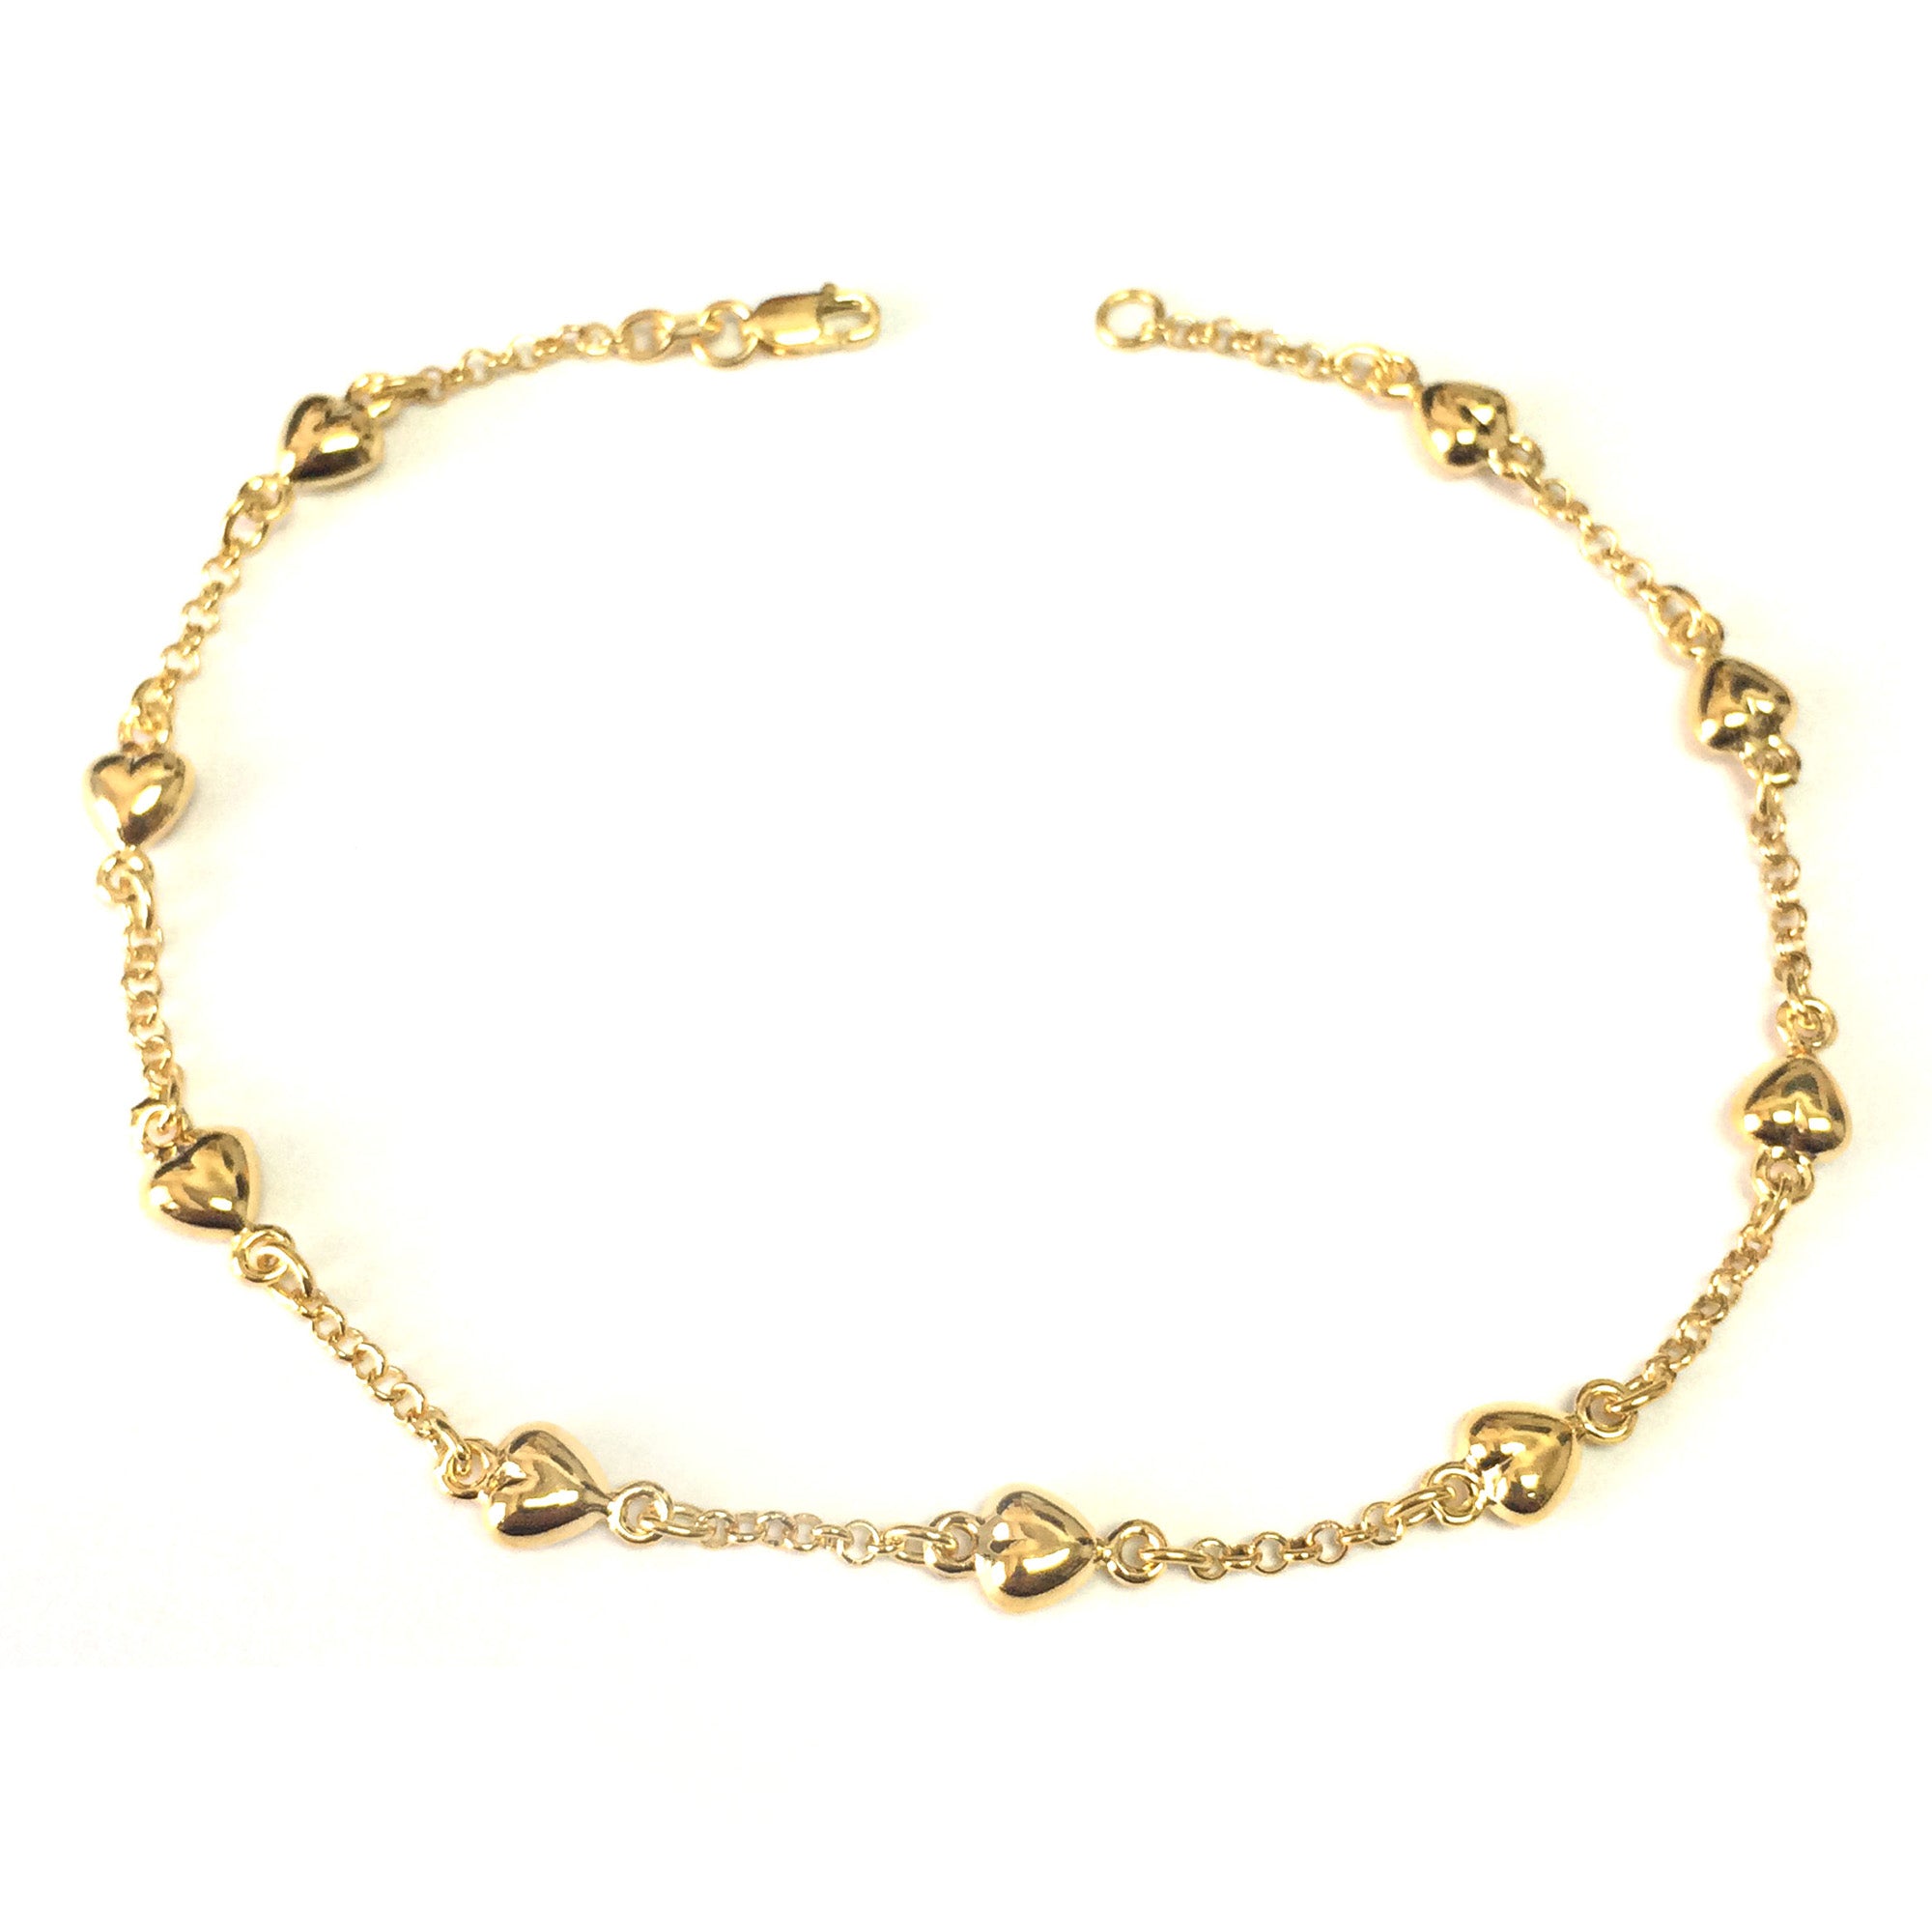 14K Yellow Gold Puffed Hearts Anklet, 10-inch